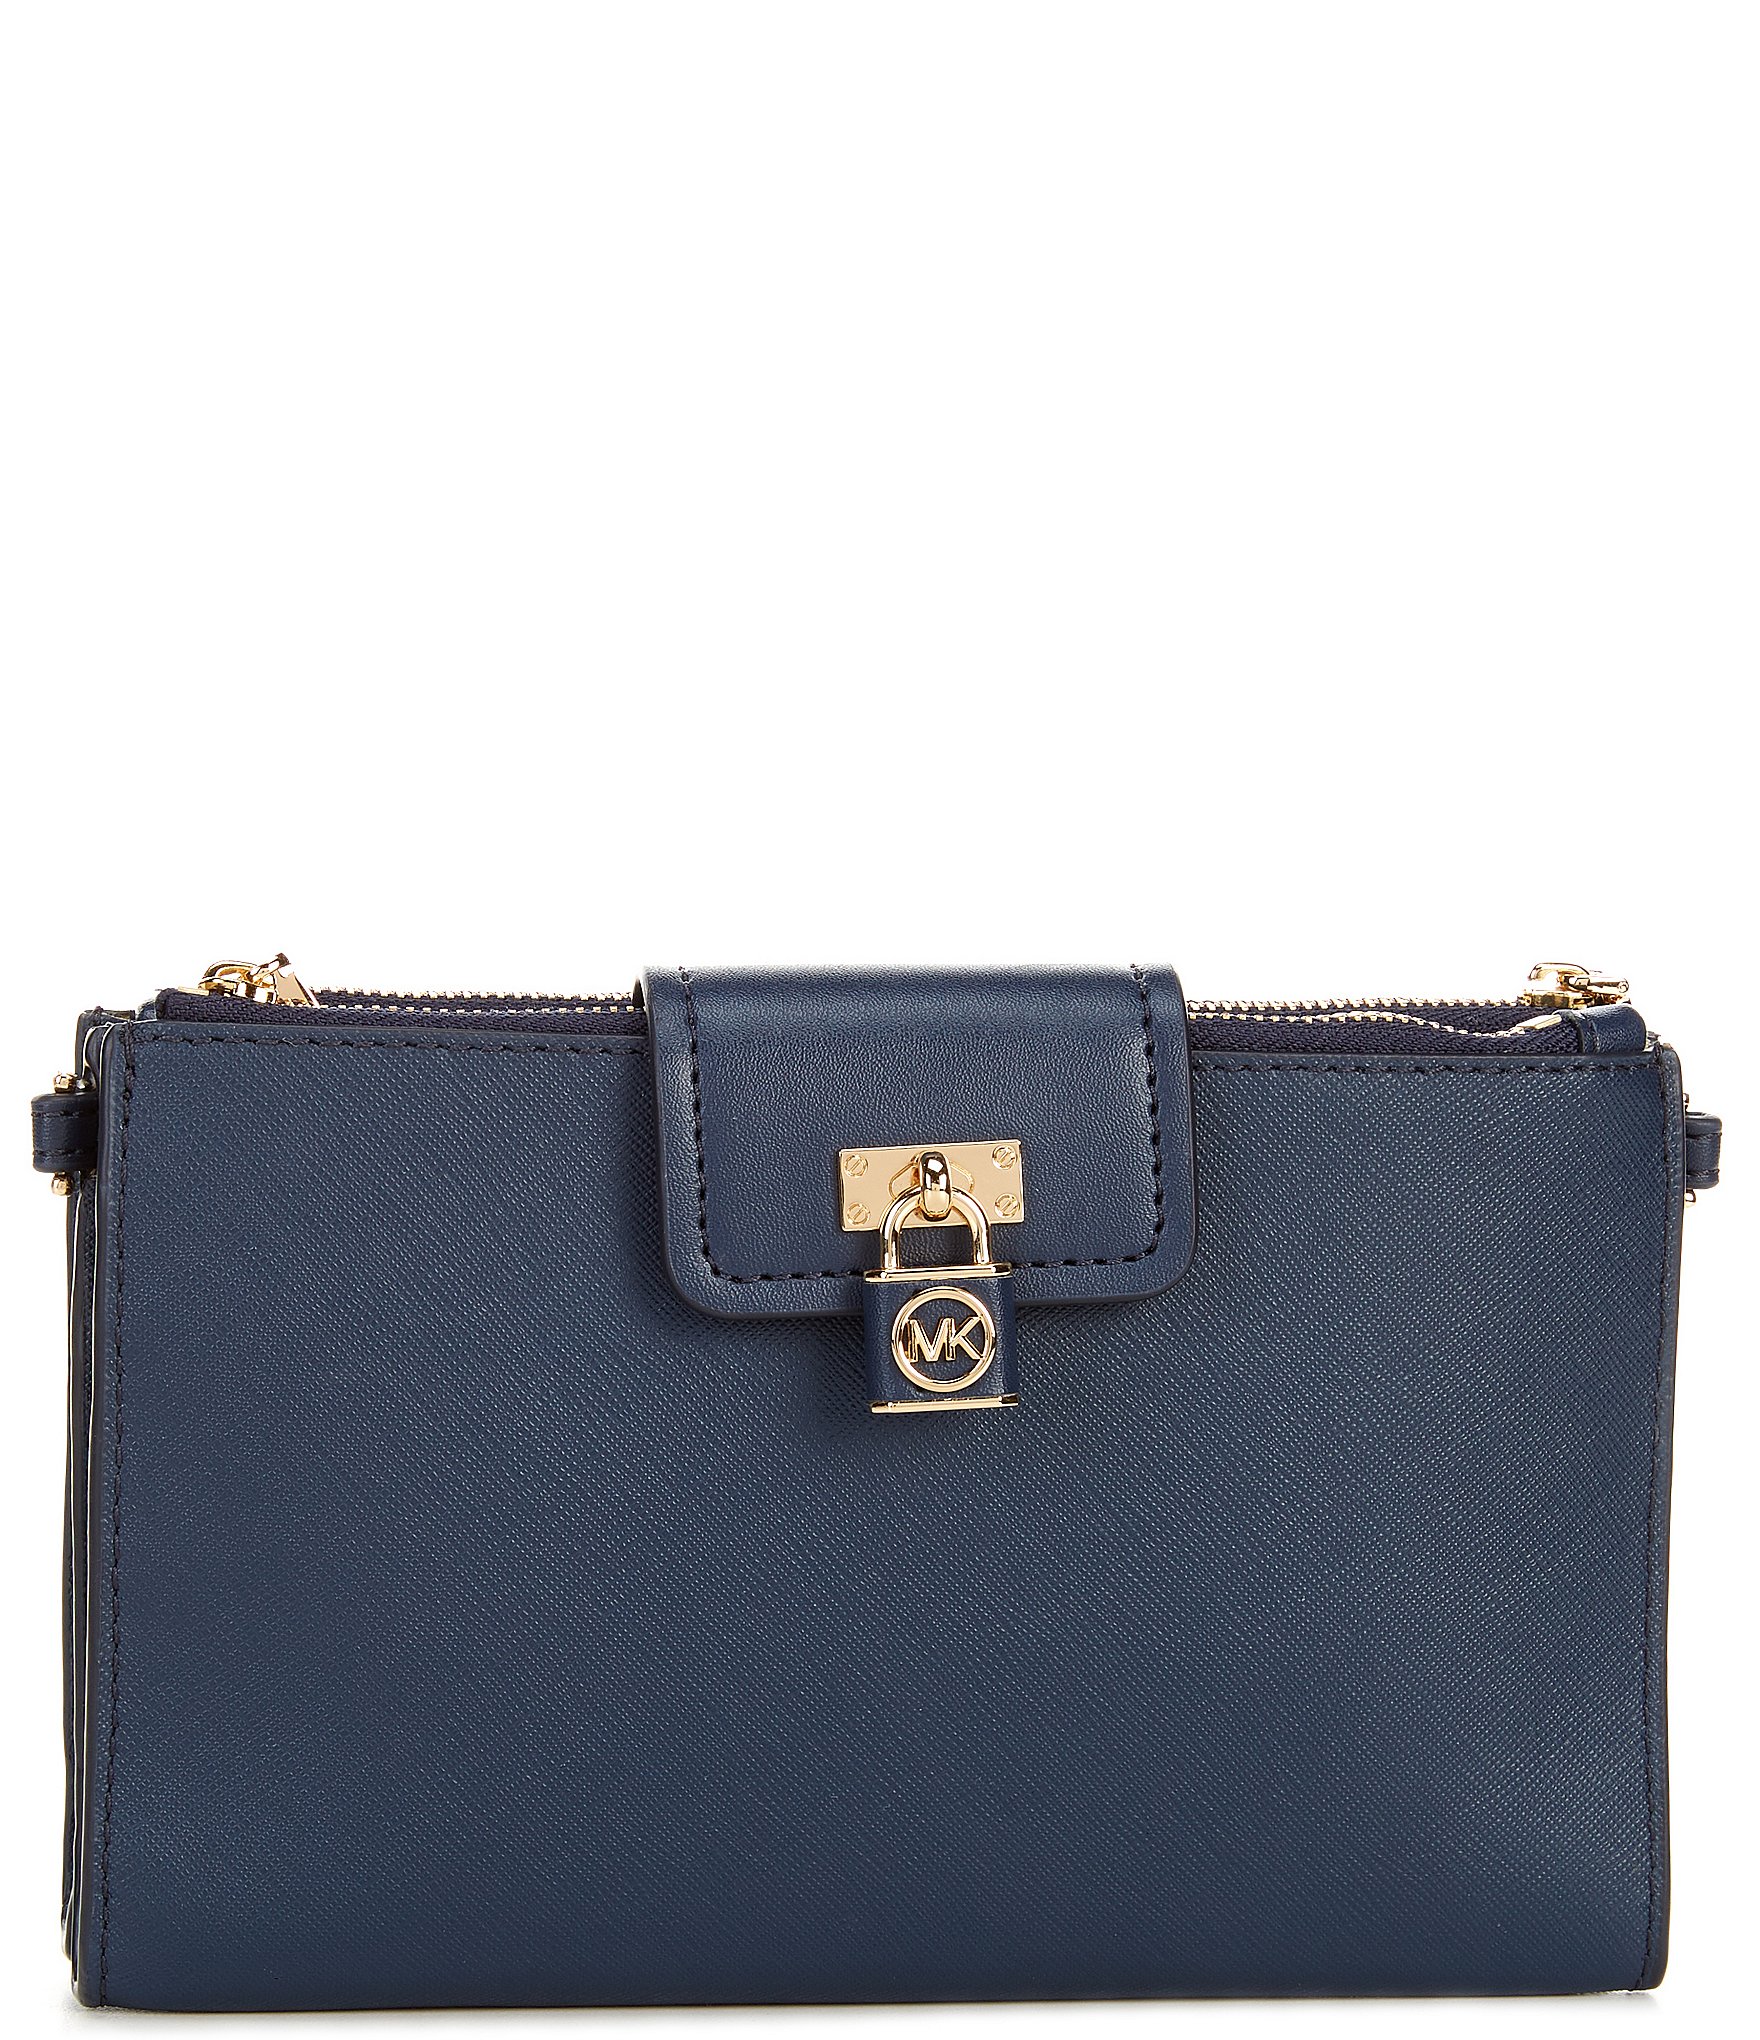 Leather crossbody bag Michael Kors Blue in Leather - 26184166